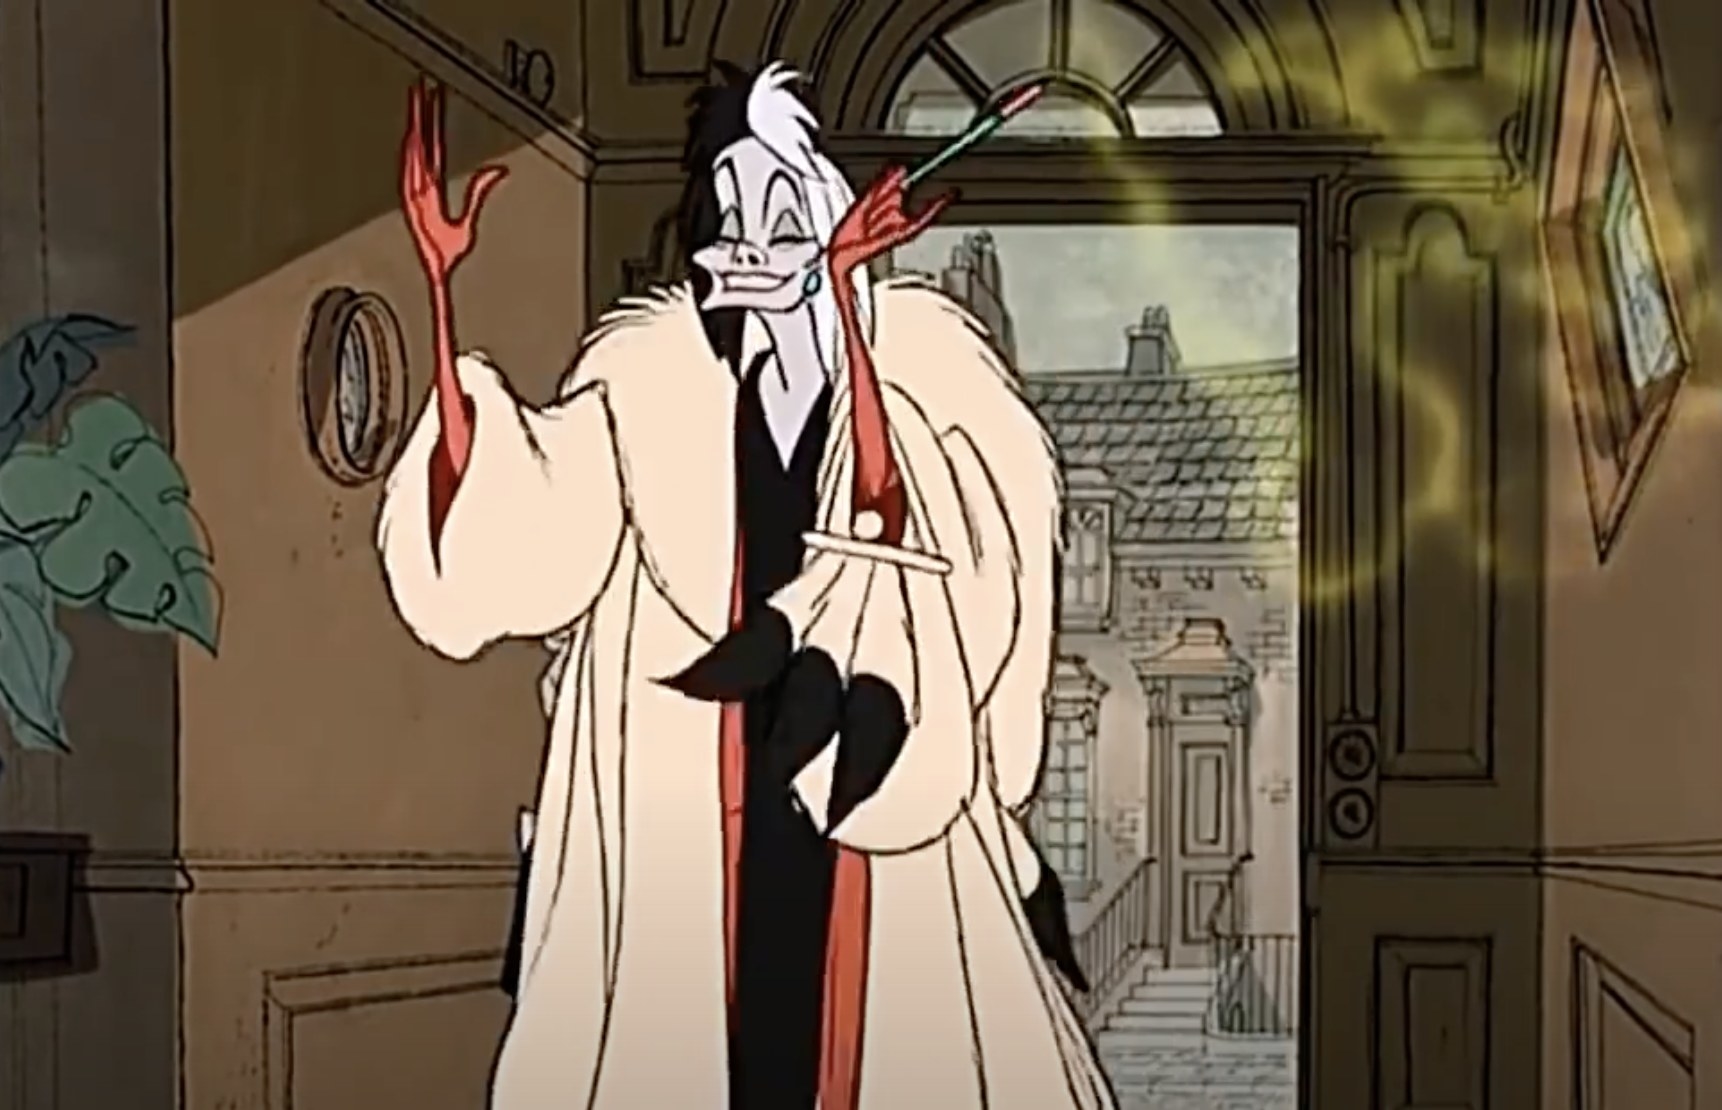 A screenshot from the animated film of Cruella holding her cigarette